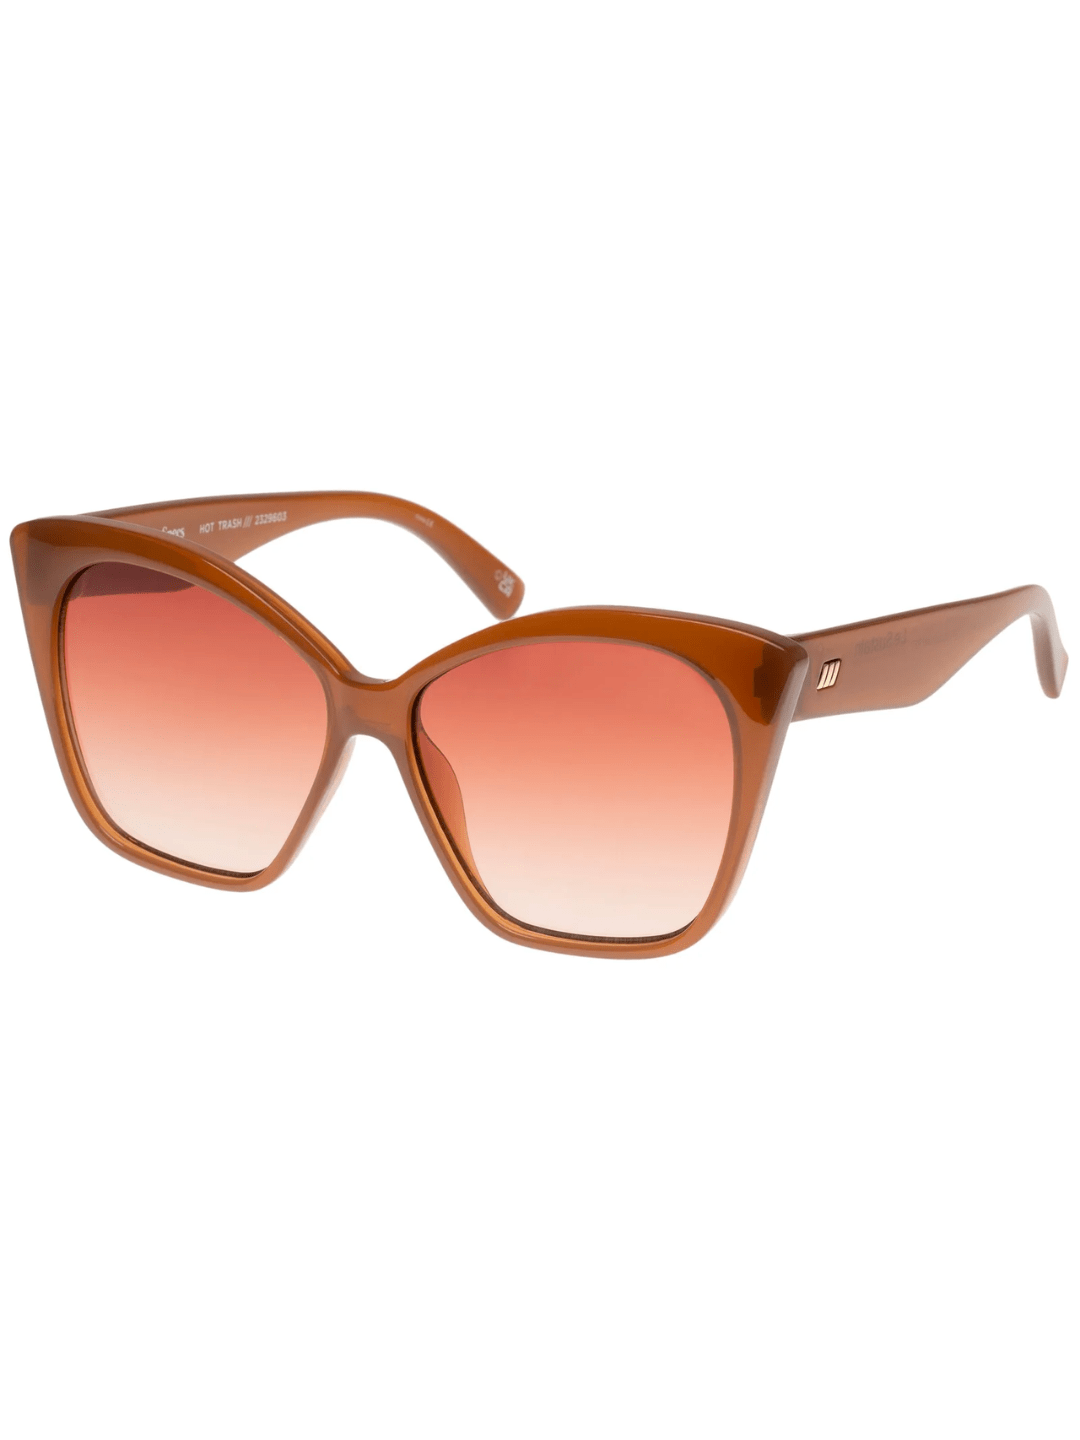 Le Specs Sunglasses Hot Trash in Root Beer